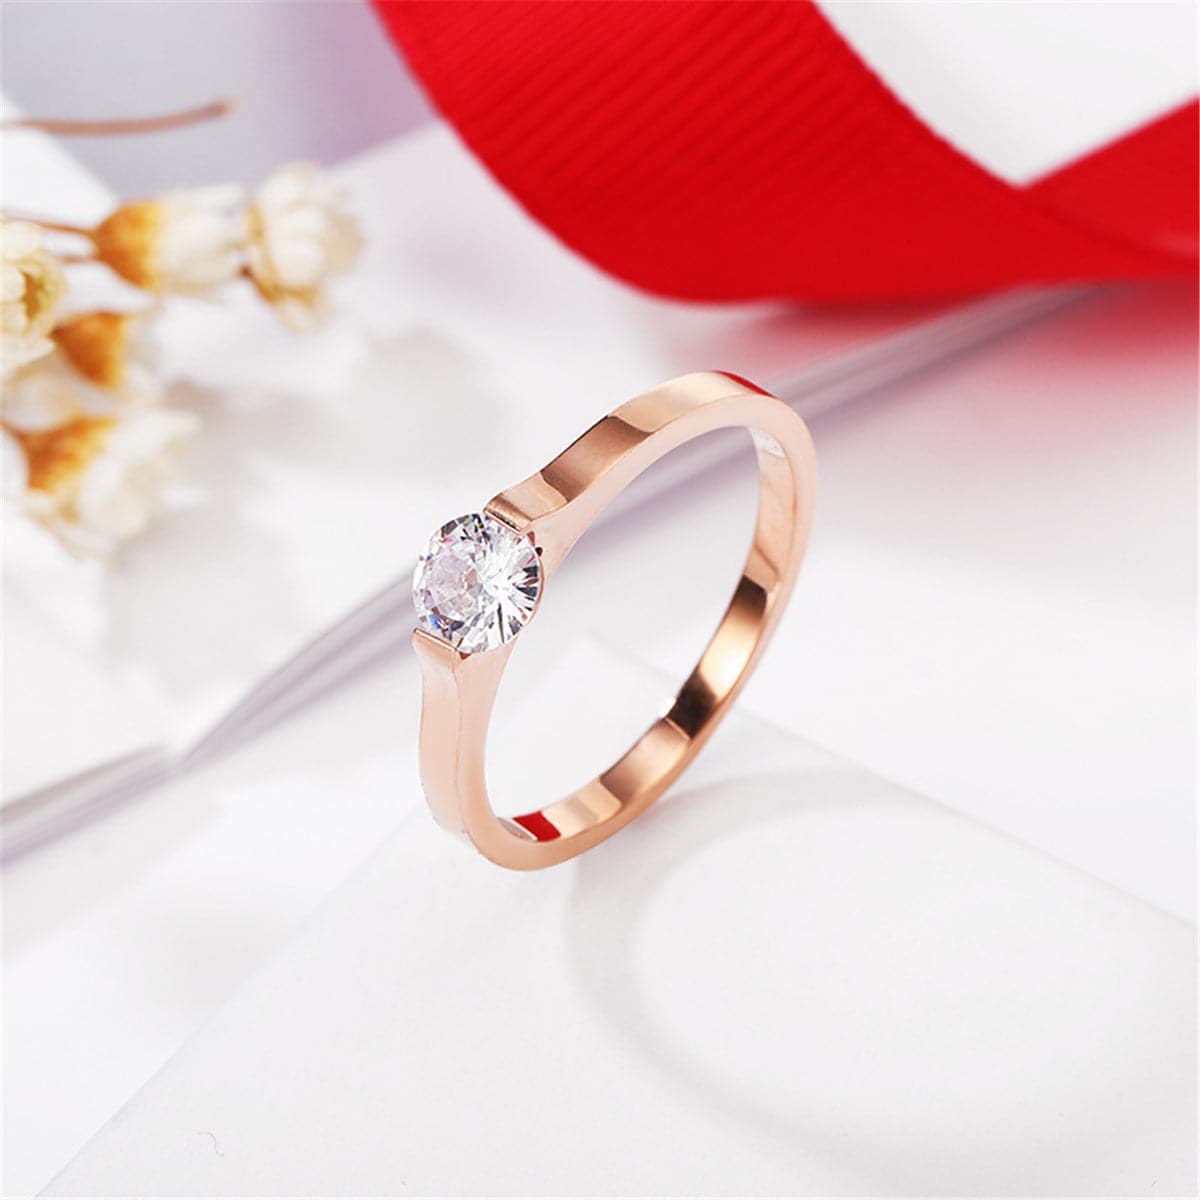 Cubic Zirconia & 18K Rose Gold-Plated Round-Cut Ring